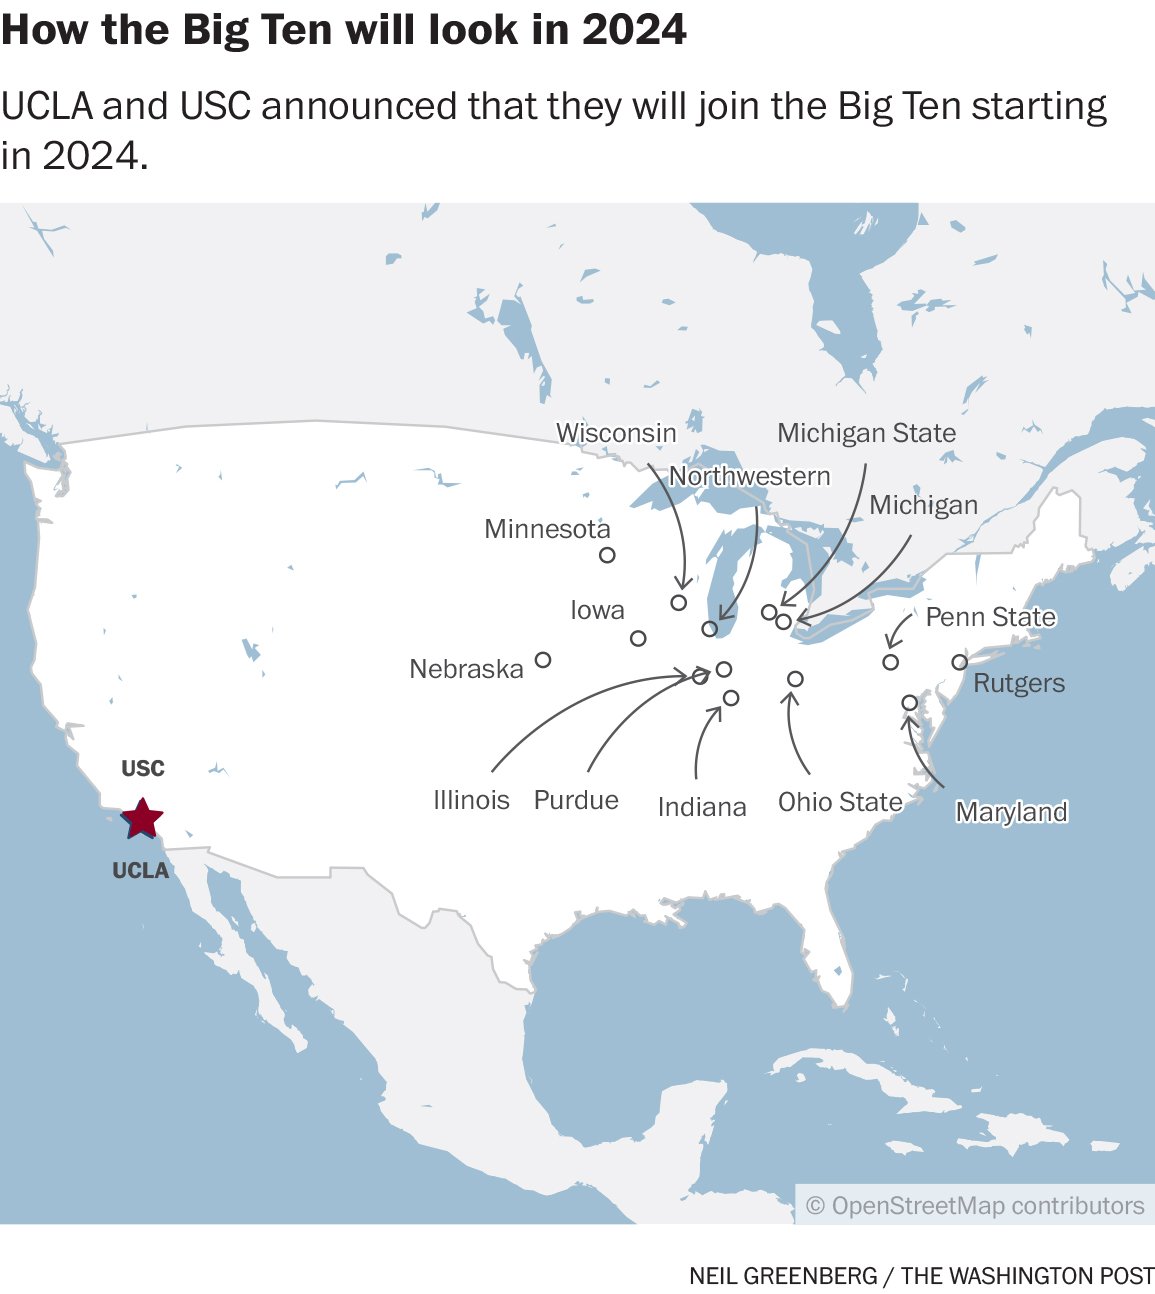 Everything you need to know about USC and UCLA's move to the Big Ten